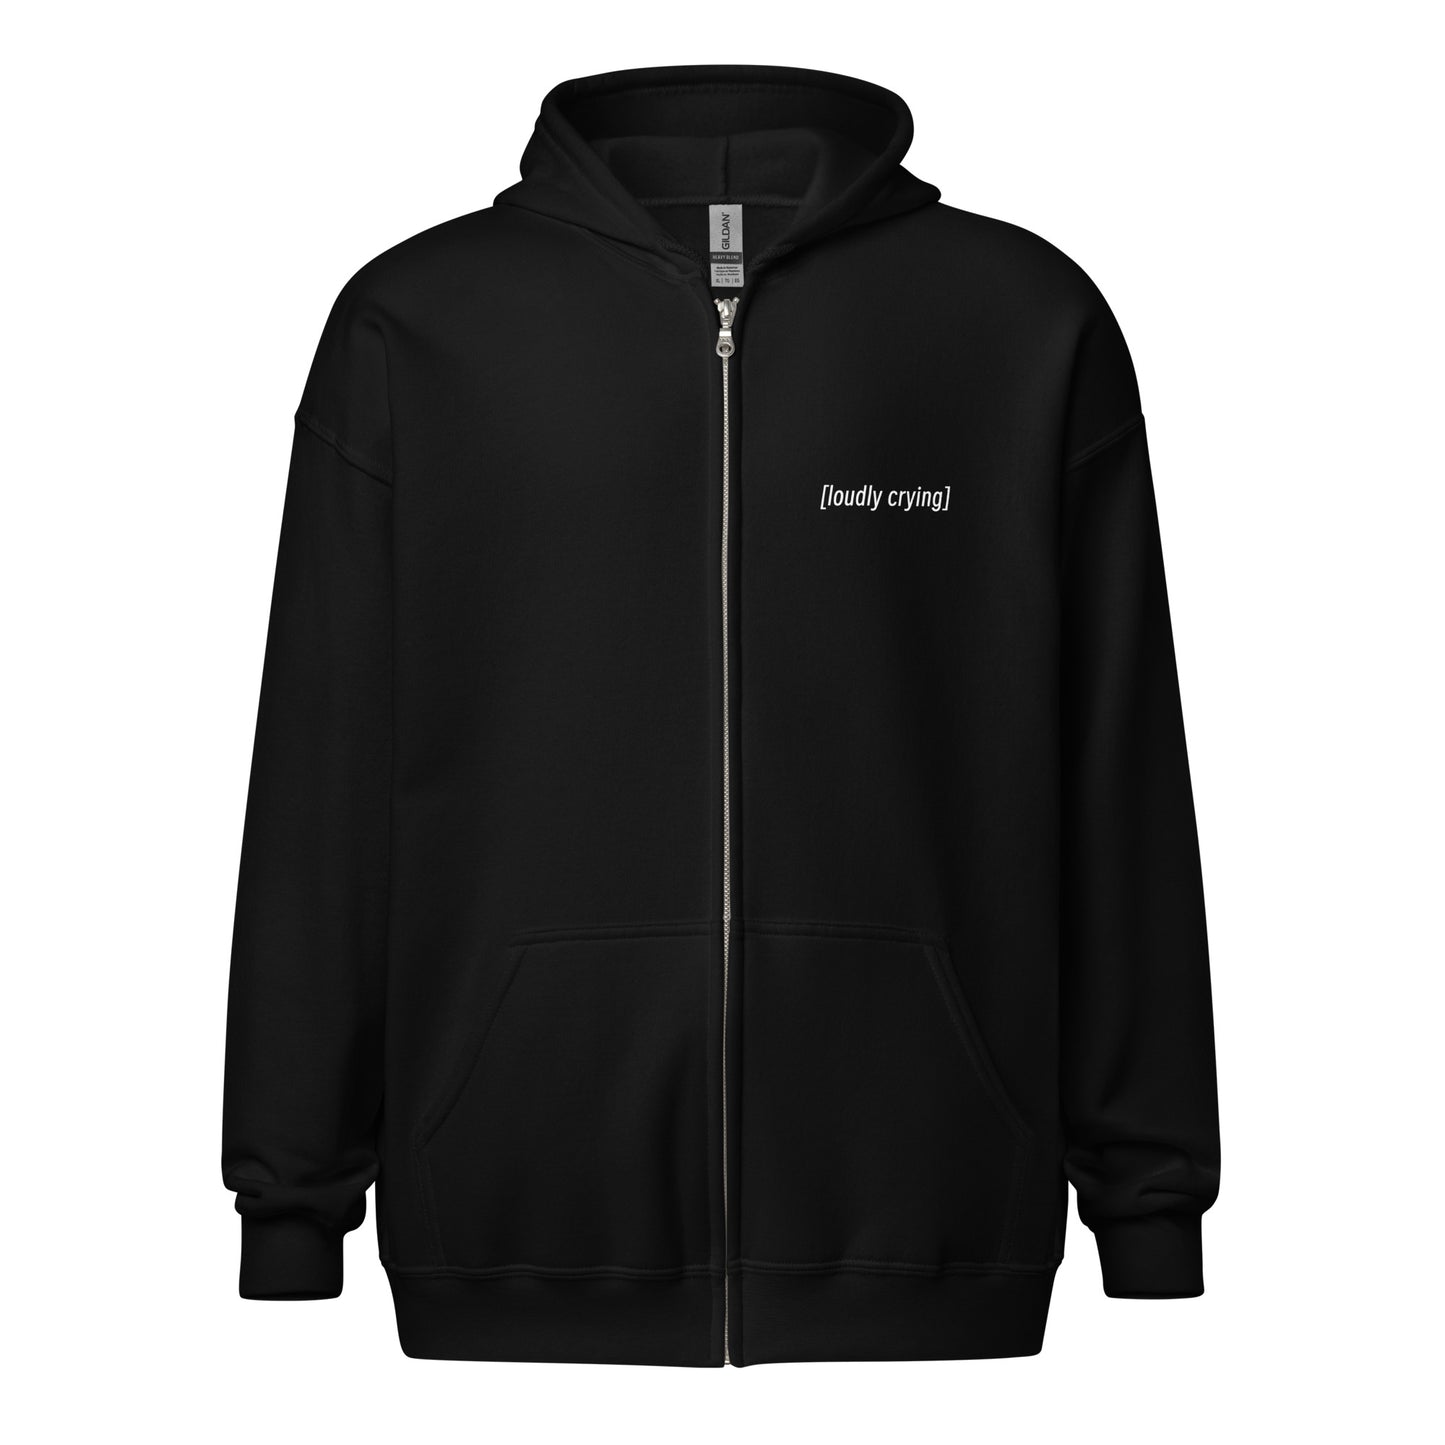 LOUDLY CRYING SUBTITLES Hoodie Zip Up